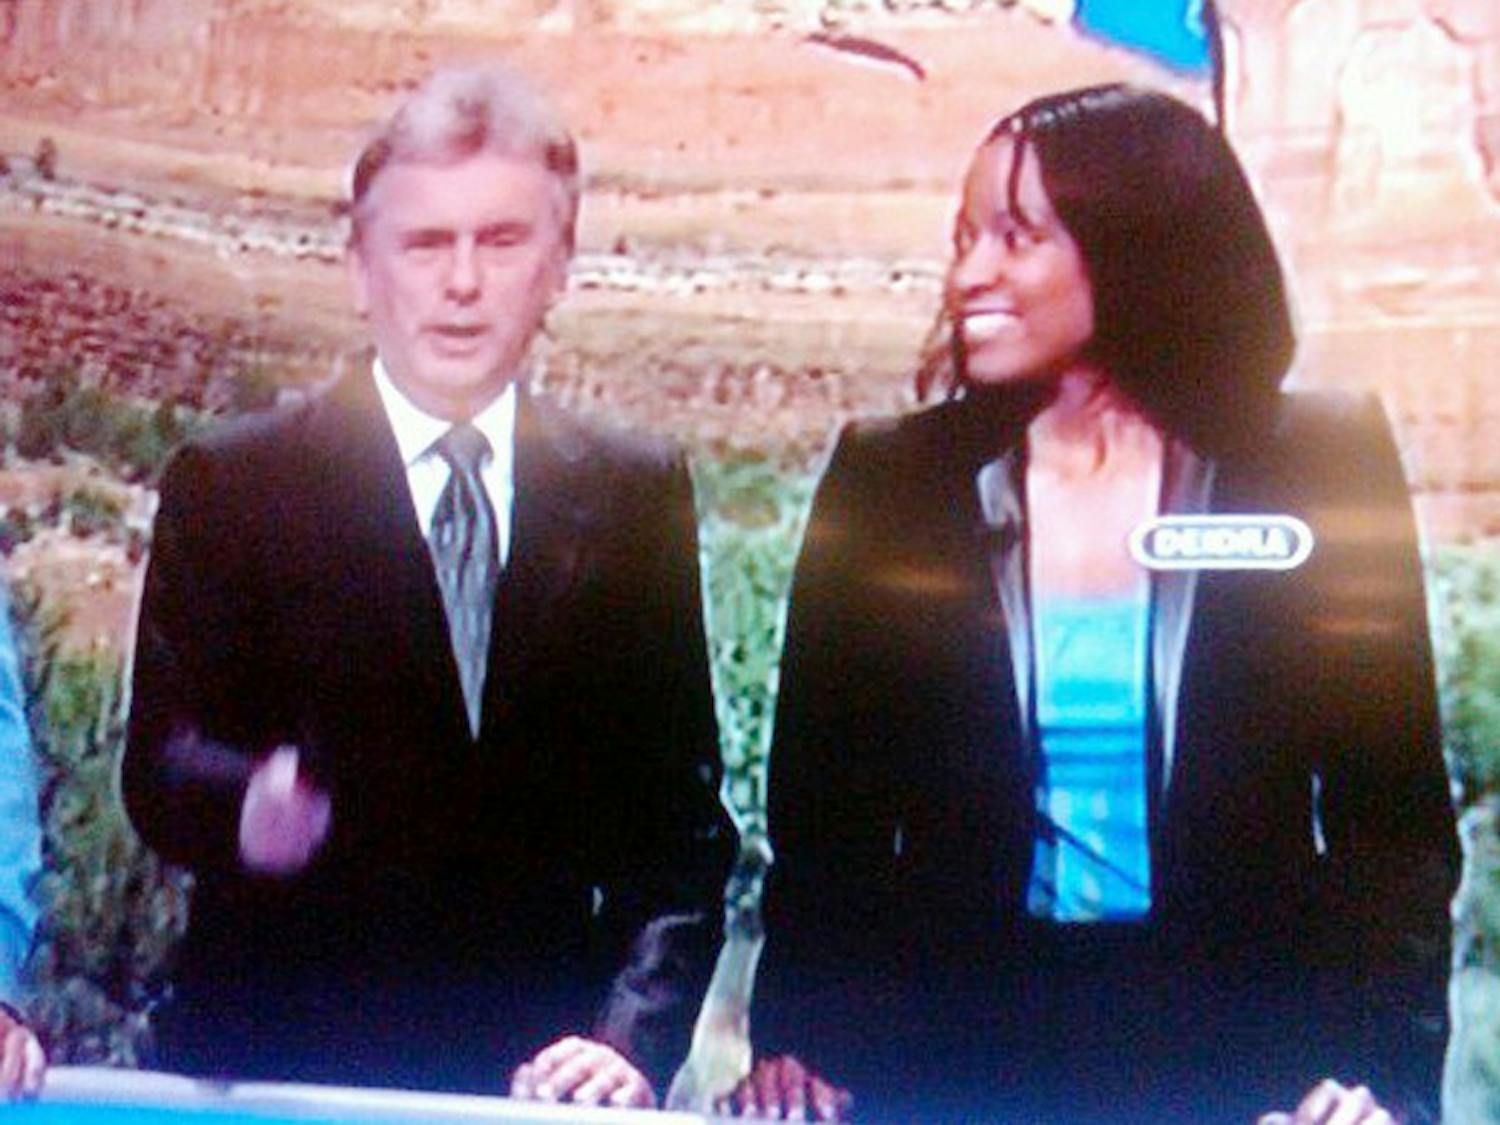 	Deidra Debnam (right) talks with Pat Sajak, the host of Wheel of Fortune, as a contestant on the show. Photo Courtesy of Deidra Debnam